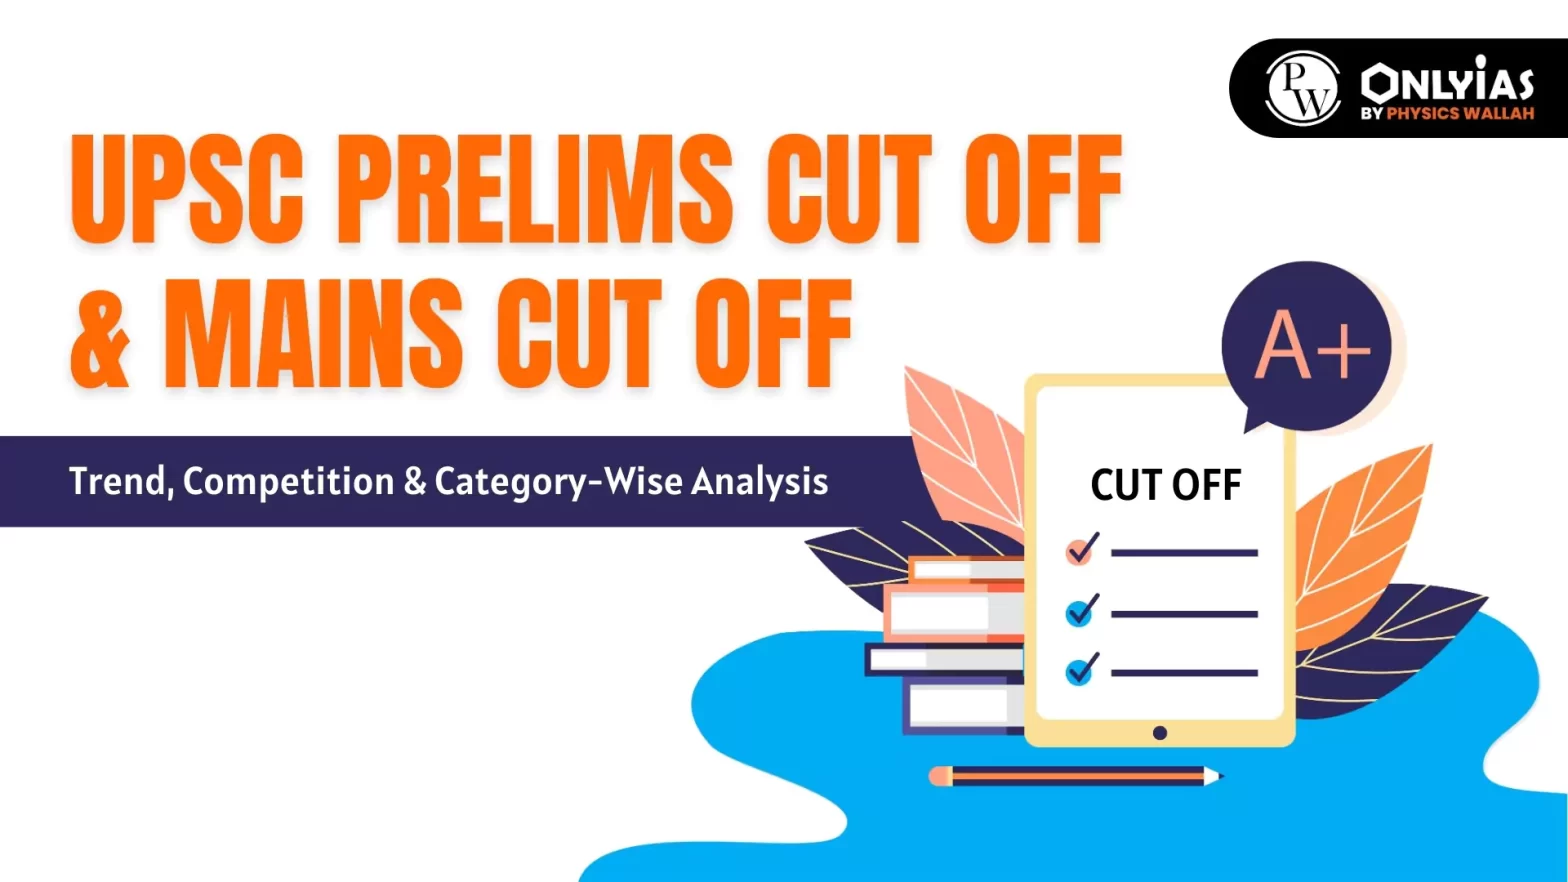 UPSC Prelims Cut Off & Mains Cut off: Trend, Competition & Category-Wise Analysis